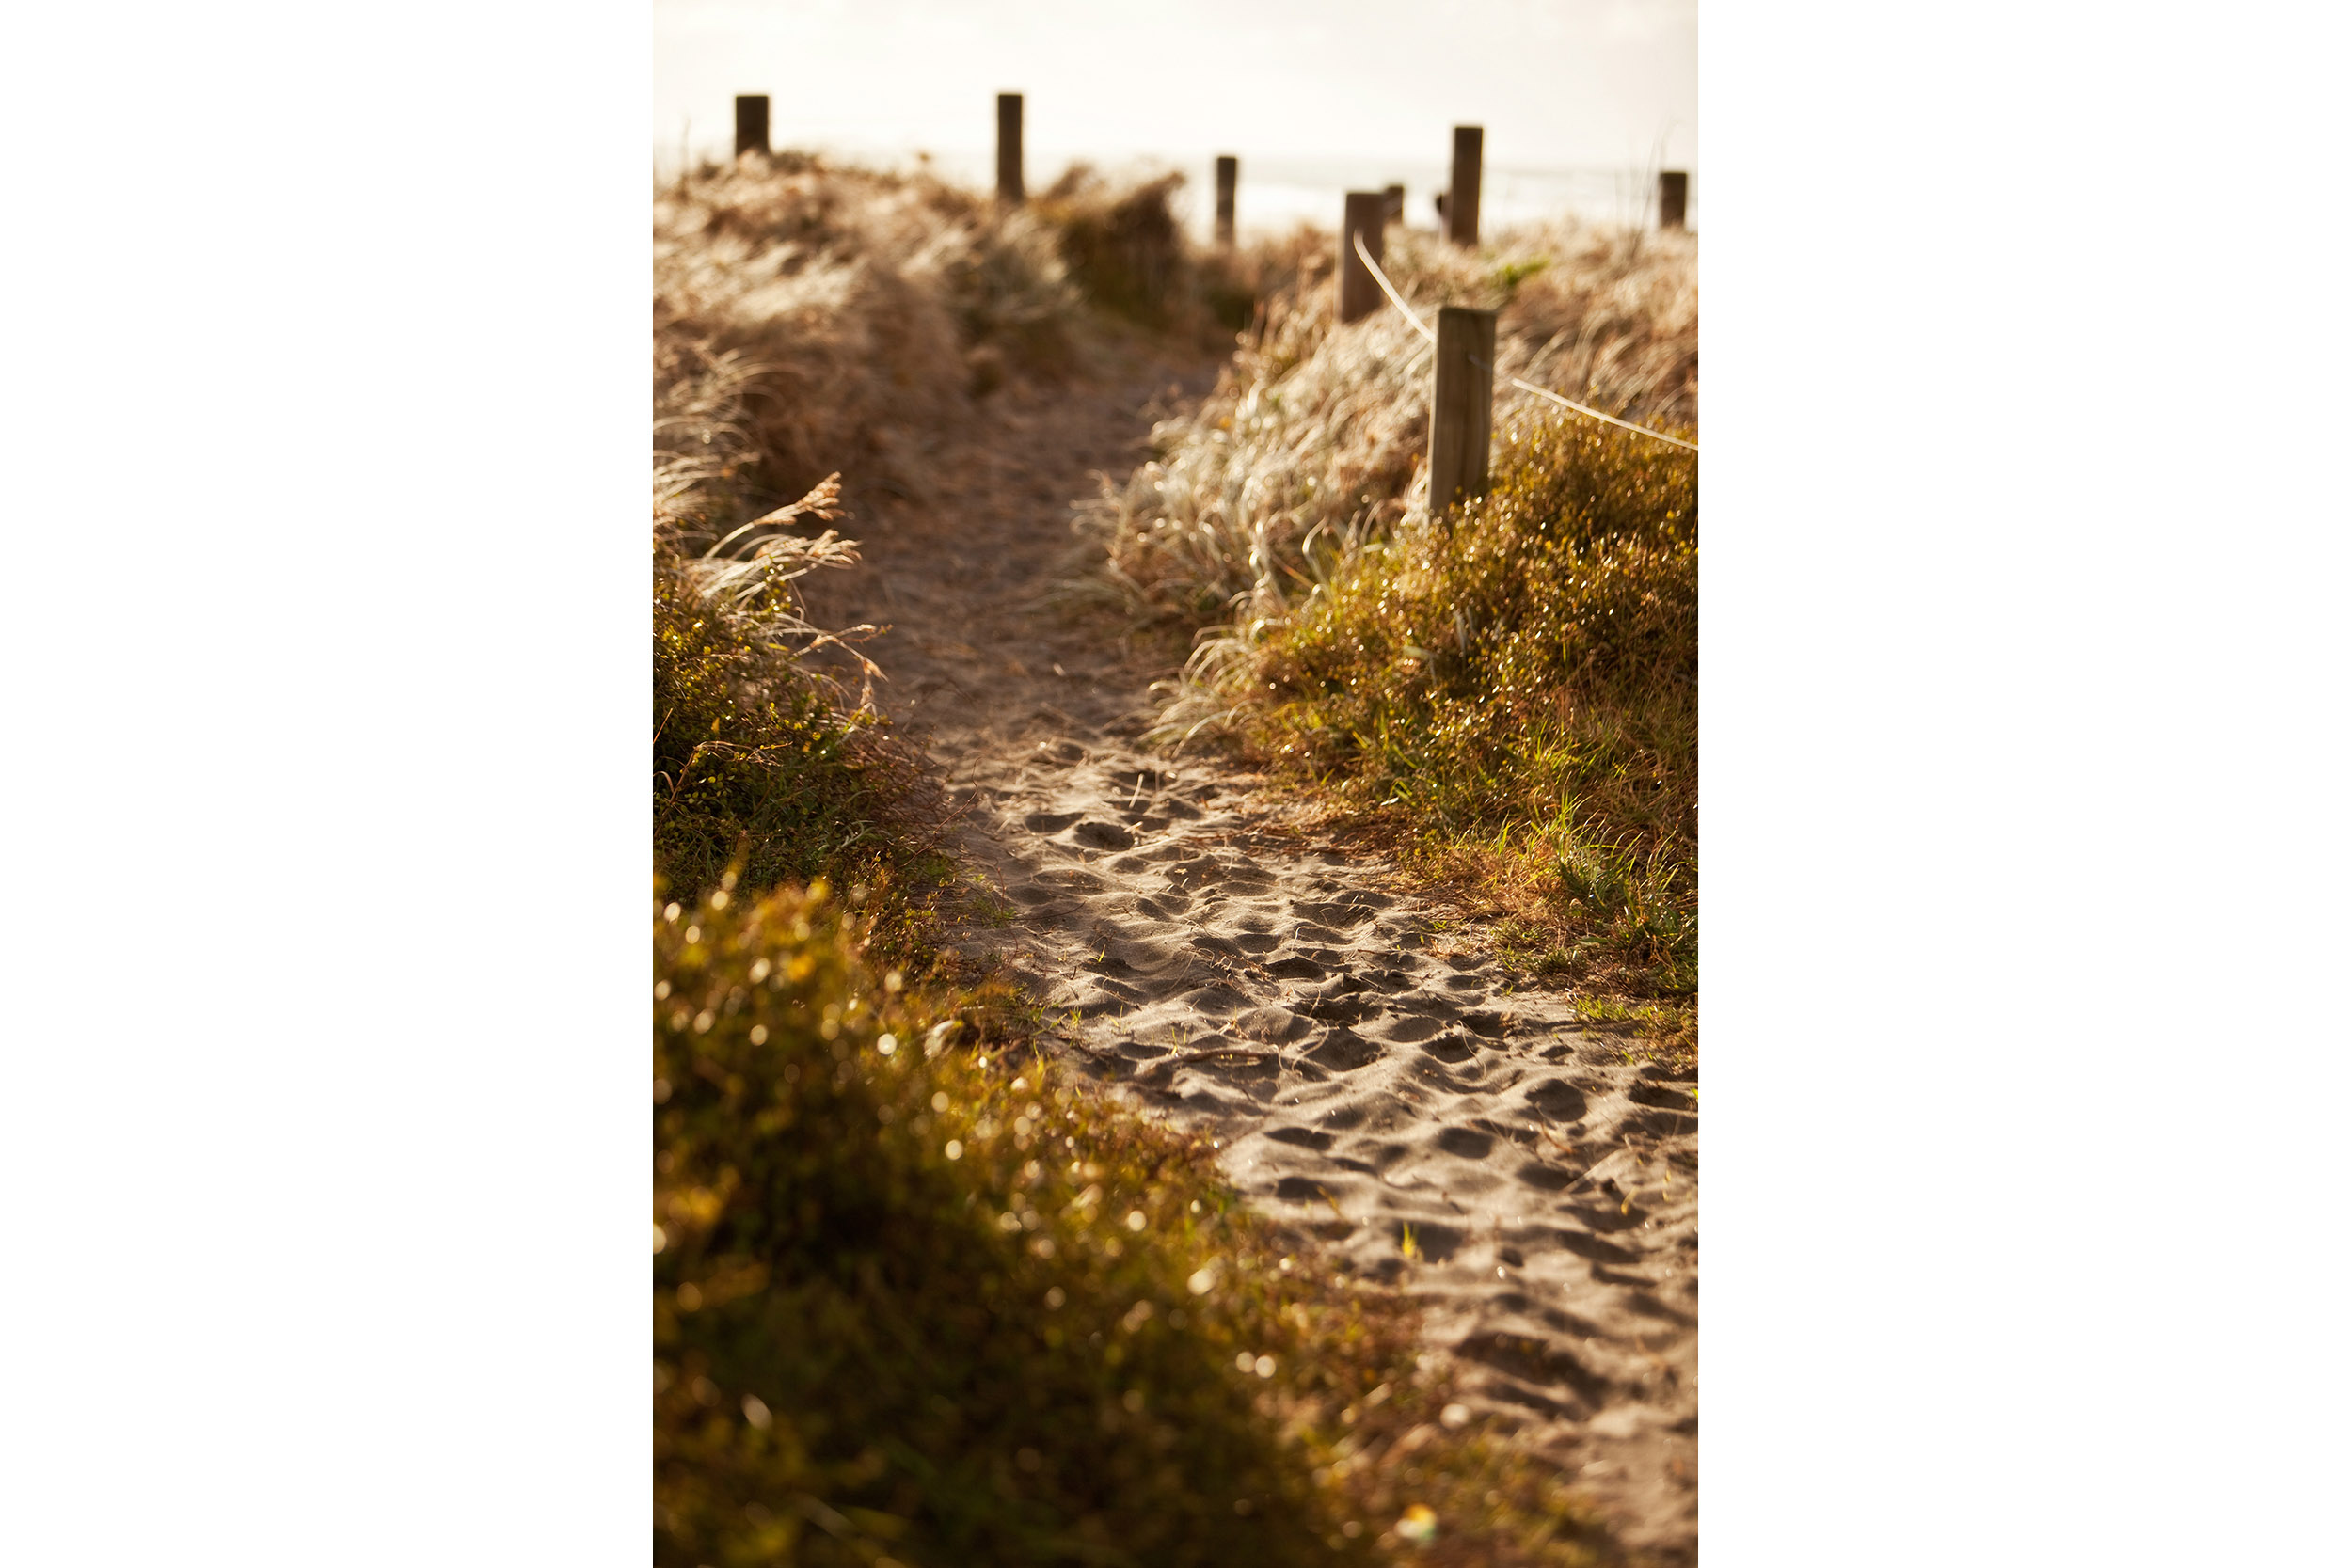 A well-worn sandy path leads the way